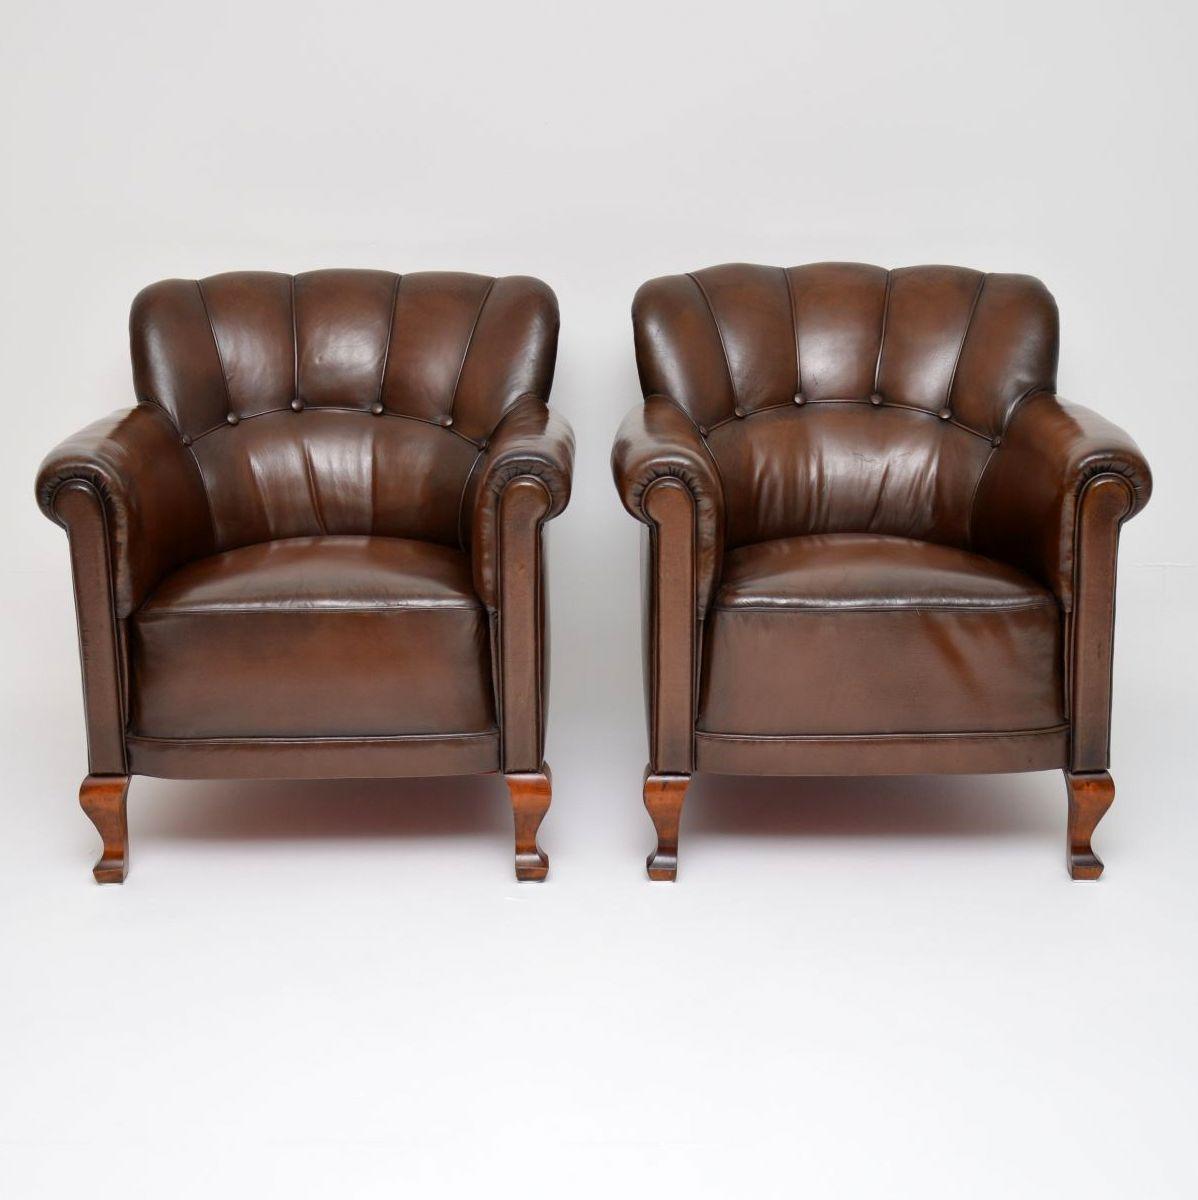 Pair of antique Swedish leather armchairs in great original condition with satin birch legs. The brown leather is naturally aged with lots of character and there are no rips, splits or holes. The inside backs are ribbed and deep buttoned. They are